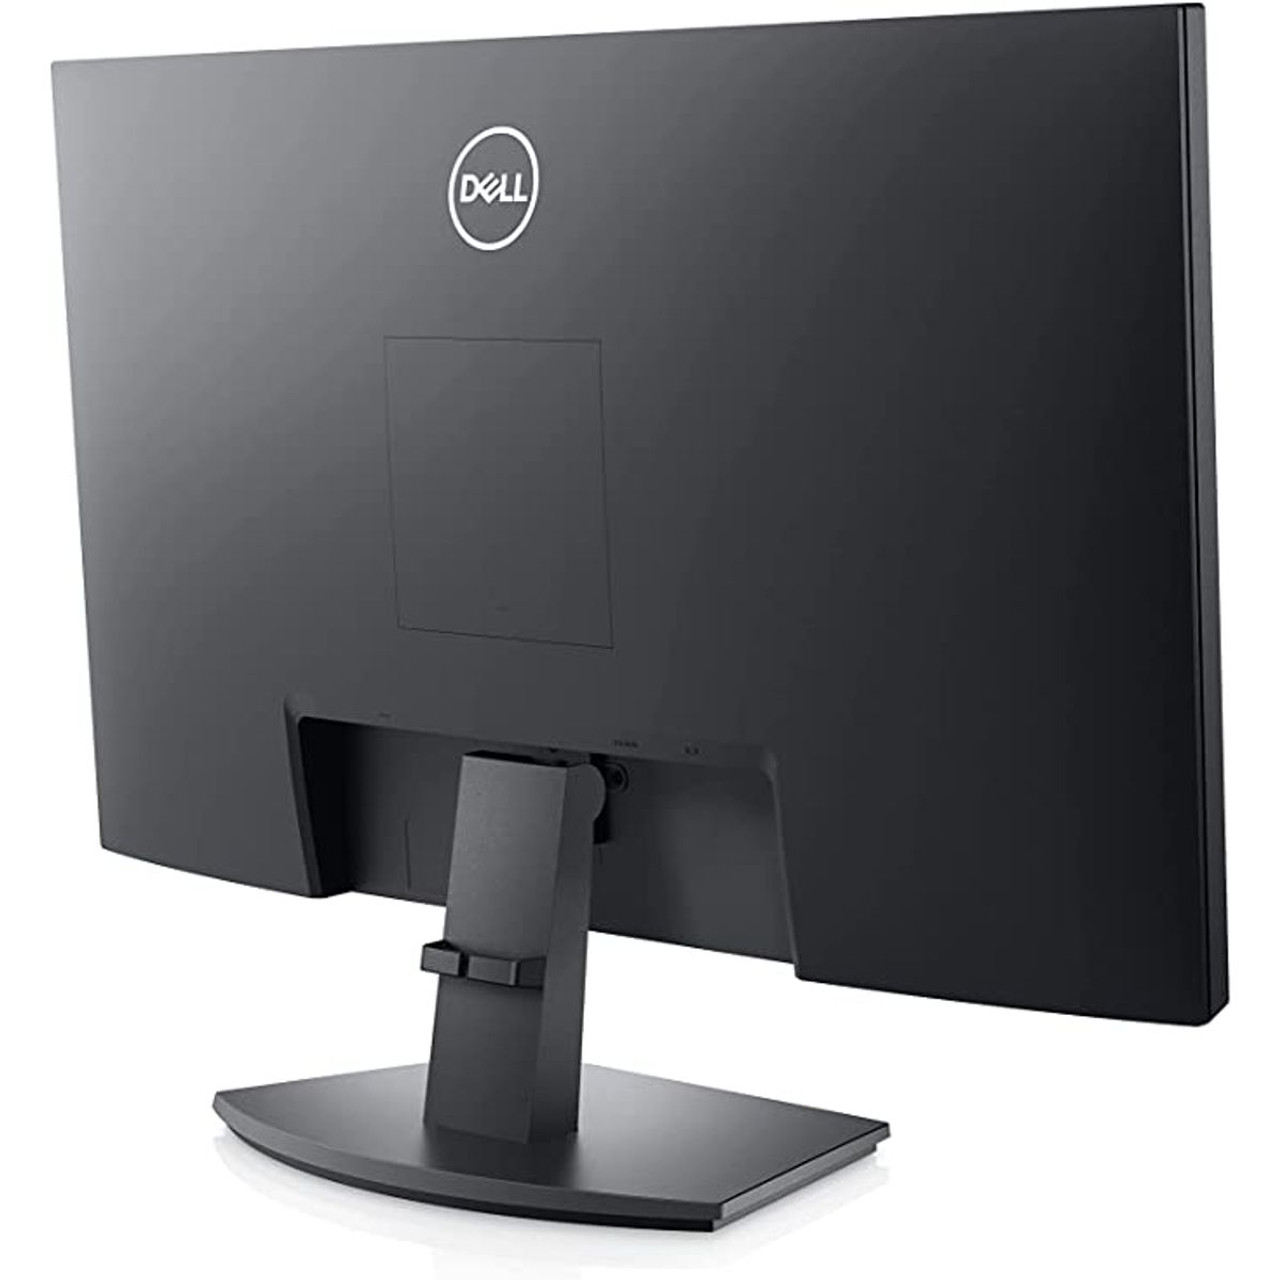 Dell 27-inch FHD 75Hz LED Monitor product image